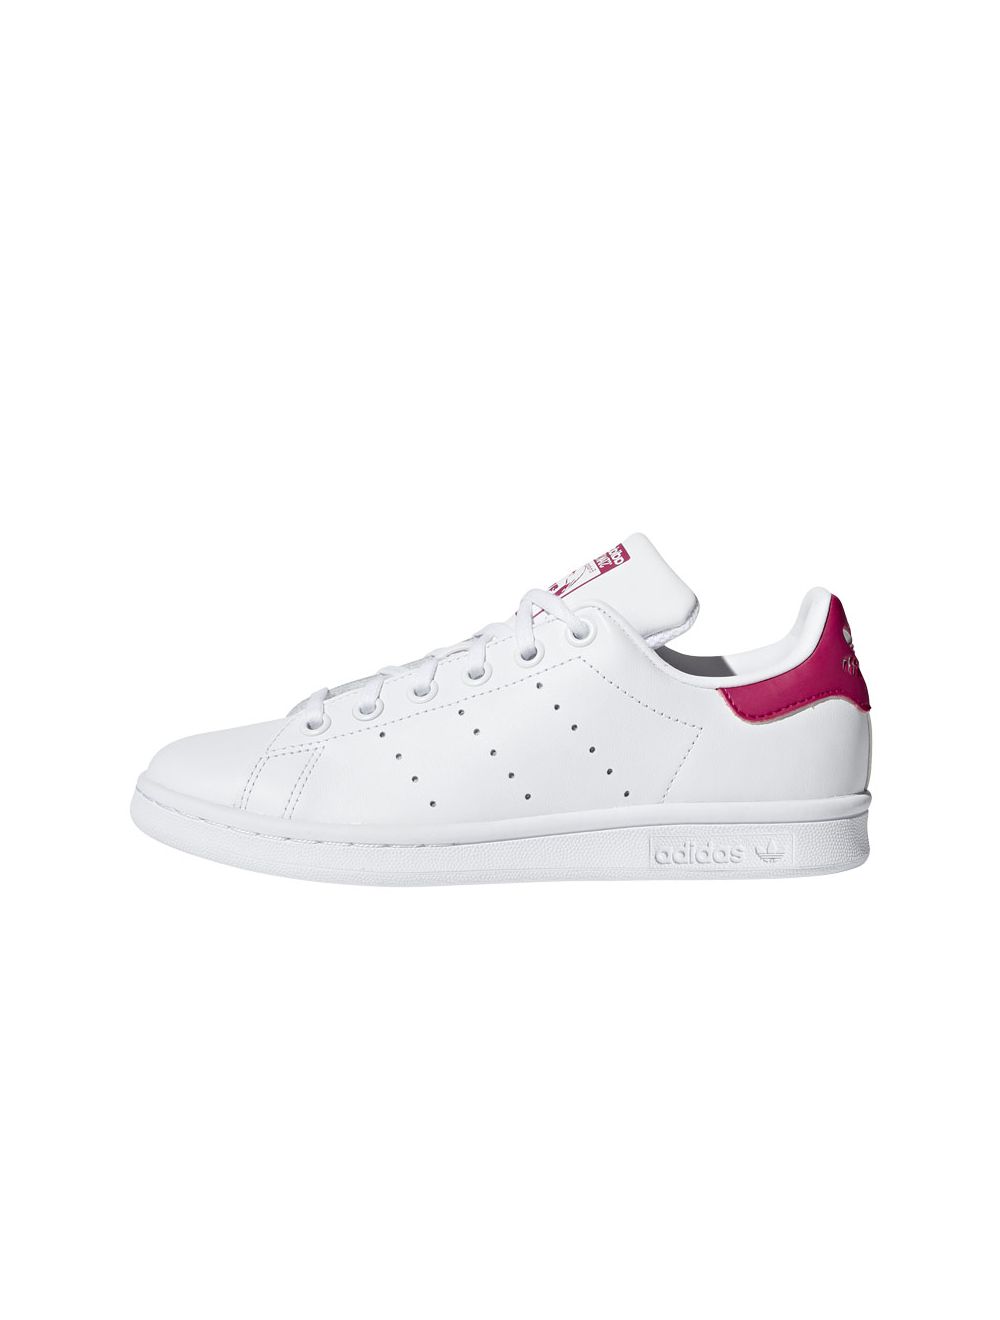 adidas shoes white pink